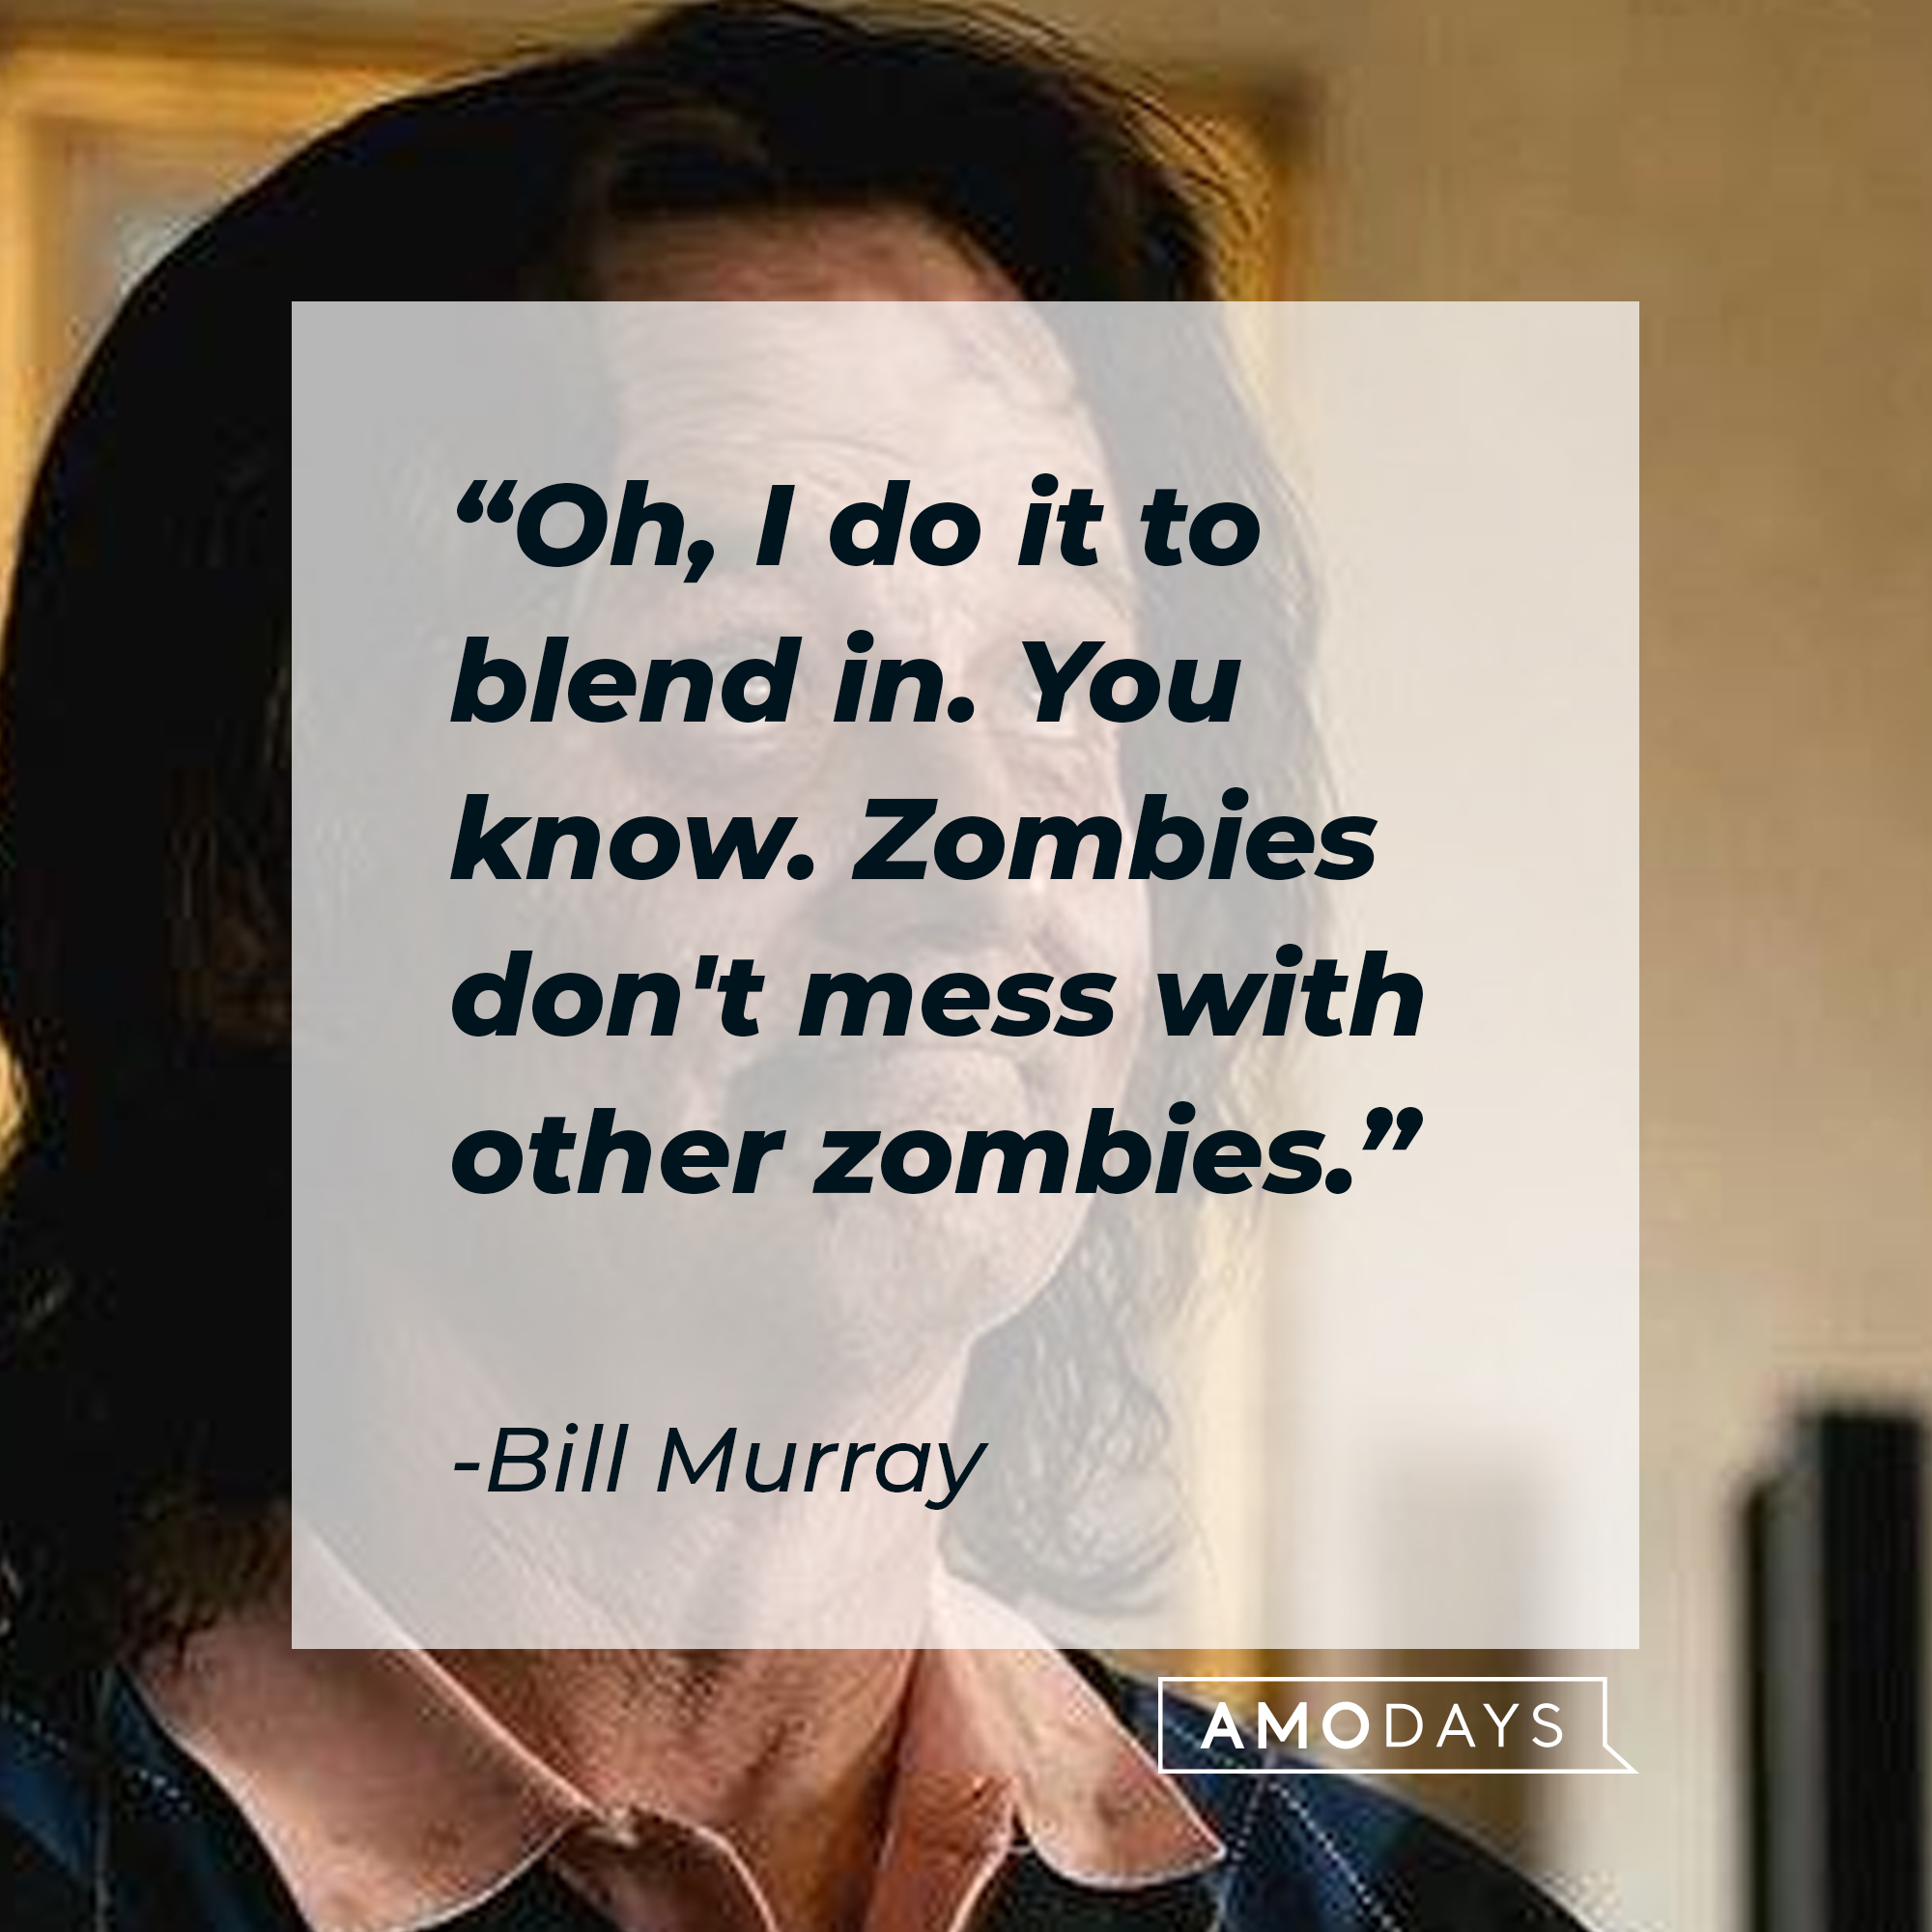 Bill Murray's quote: "Oh, I do it to blend in. You know. Zombies don't mess with other zombies." | Source: Facebook.com/Zombieland